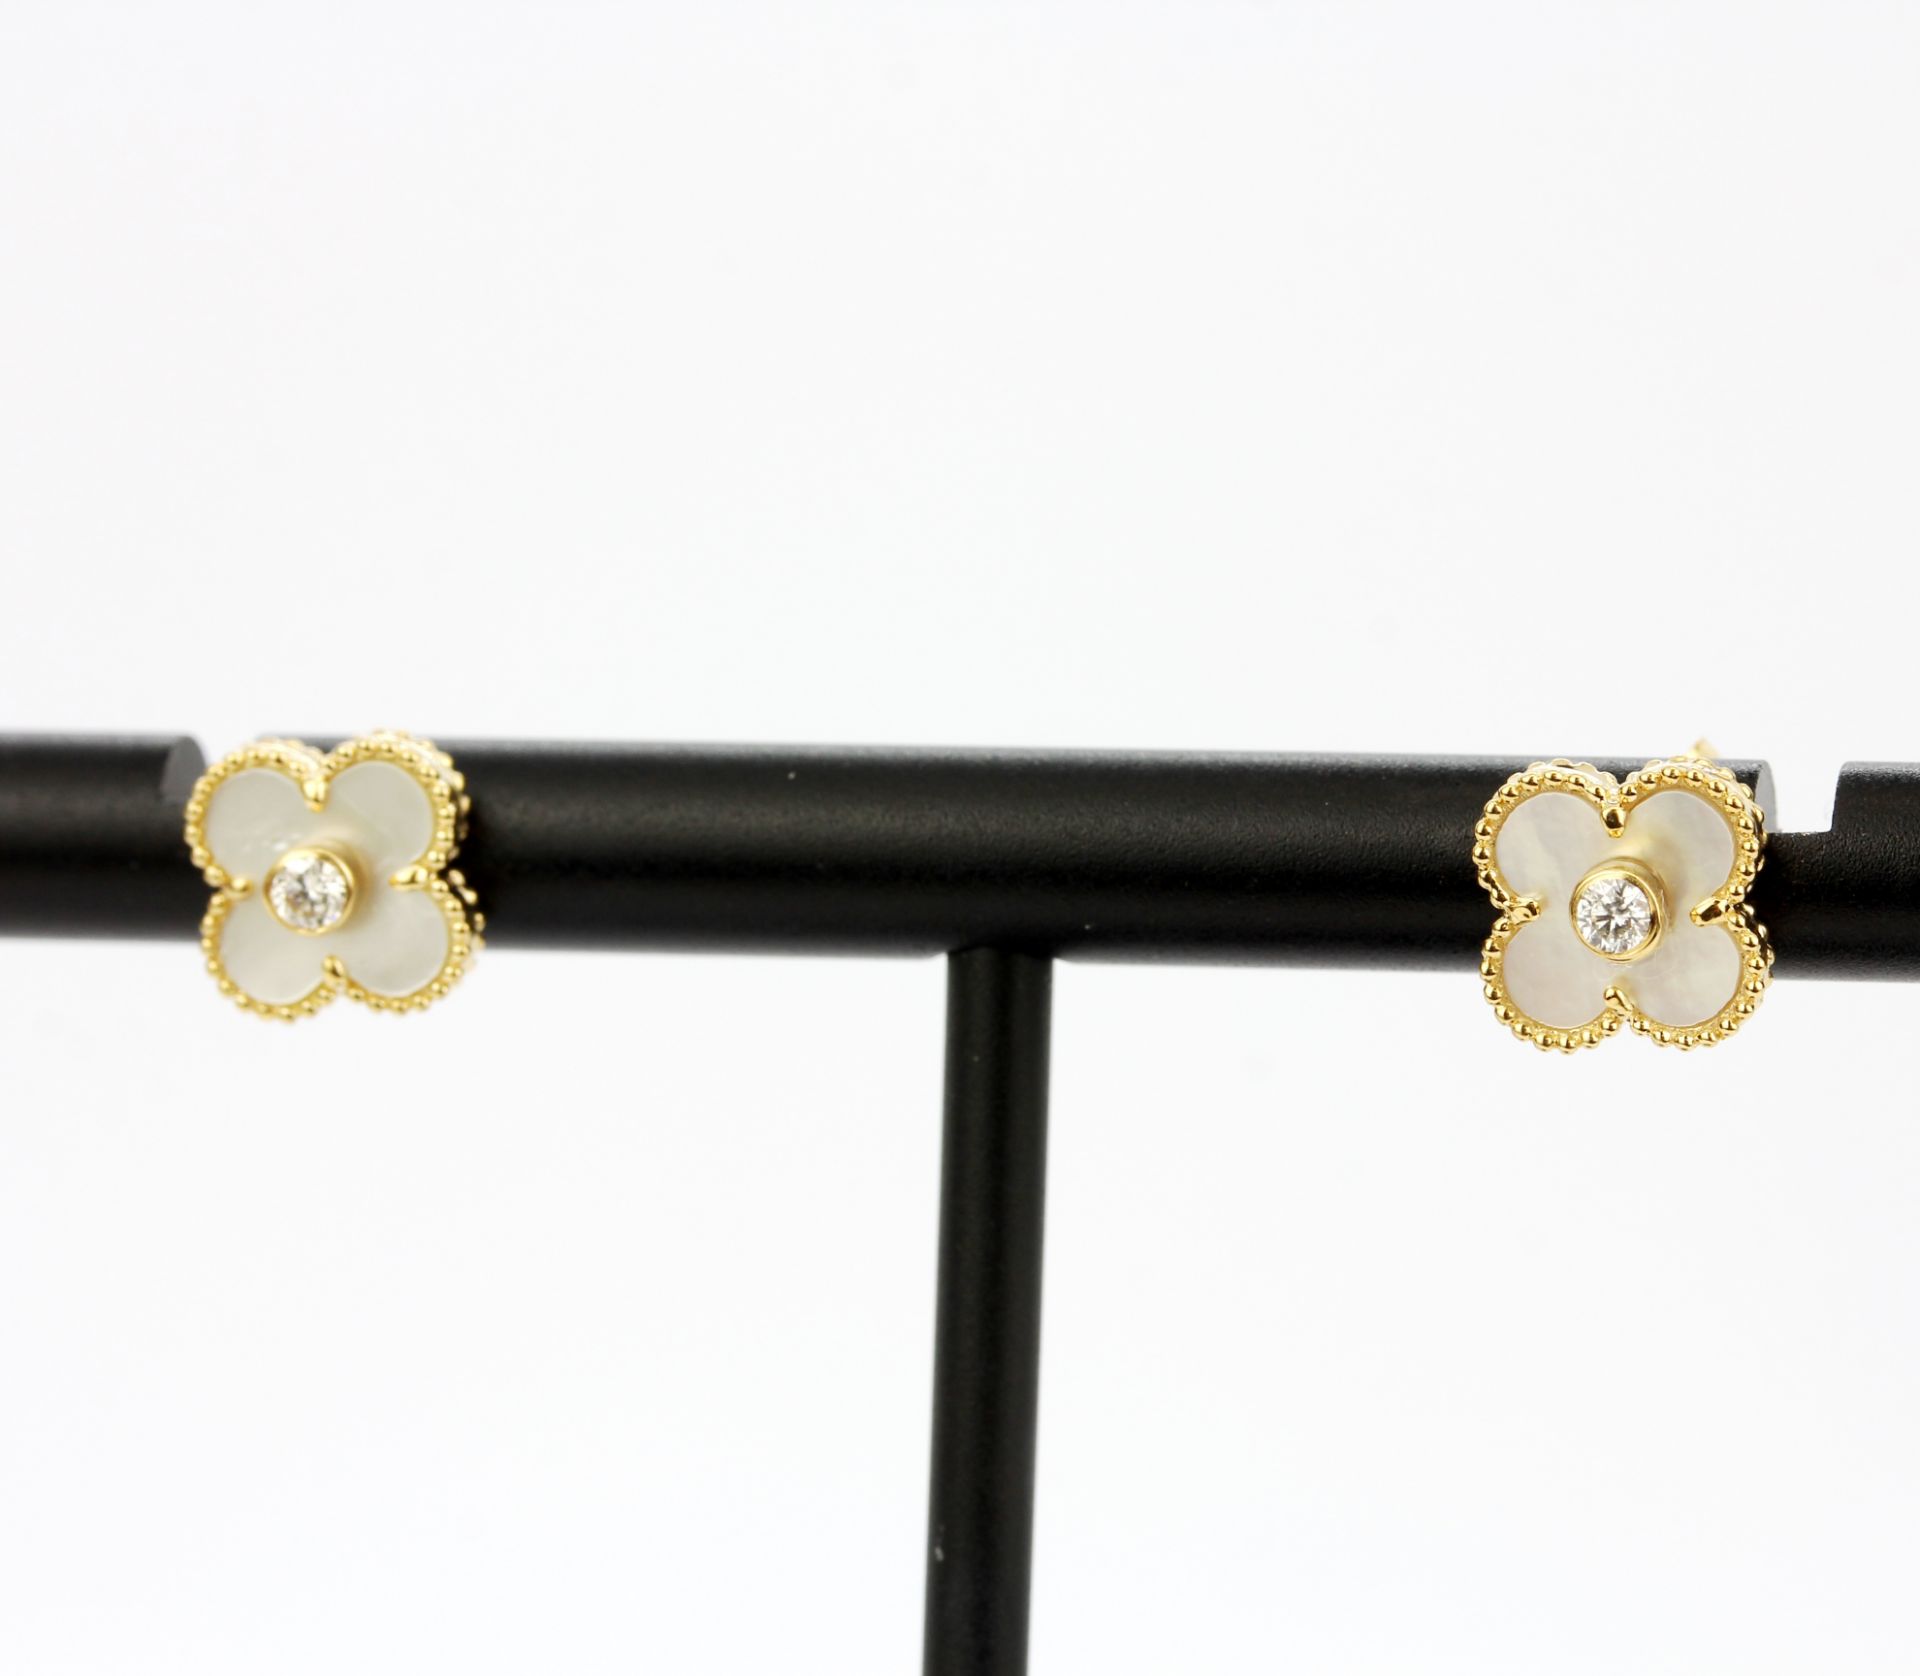 A pair of 18ct yellow gold (stamped 18K) stud earrings set with mother of pearl and a diamond, L. - Image 3 of 4